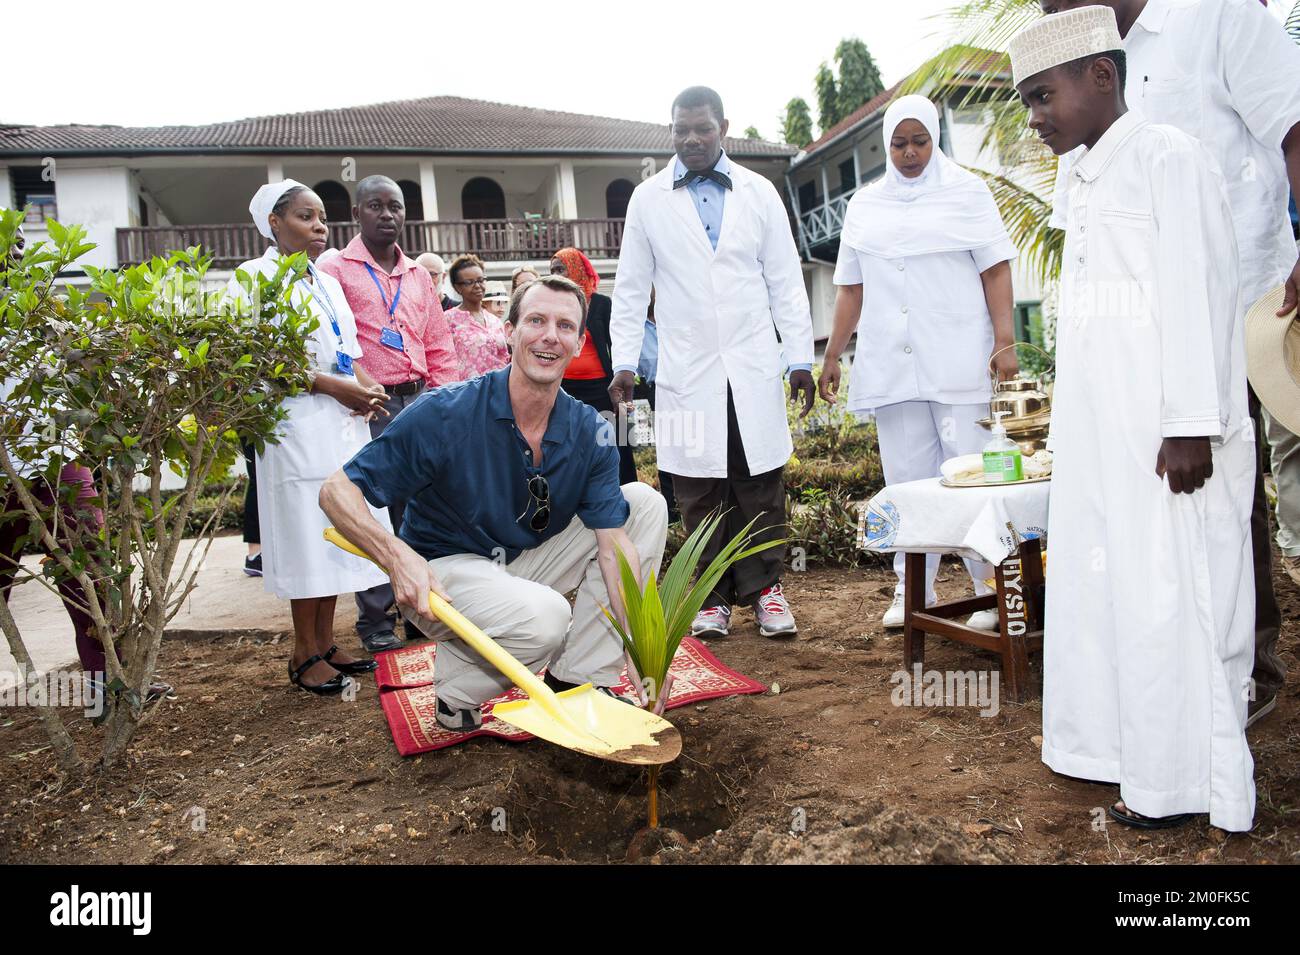 Prince Joachim and the Delegation of Care Denmark has come to Zanzibar where the Prince is visiting a Danida-supported hospital, Wednesday, September 5th. 2012. PHOTOGRAPHER KLAVS BO CHRISTENSEN / POLFOTO Stock Photo